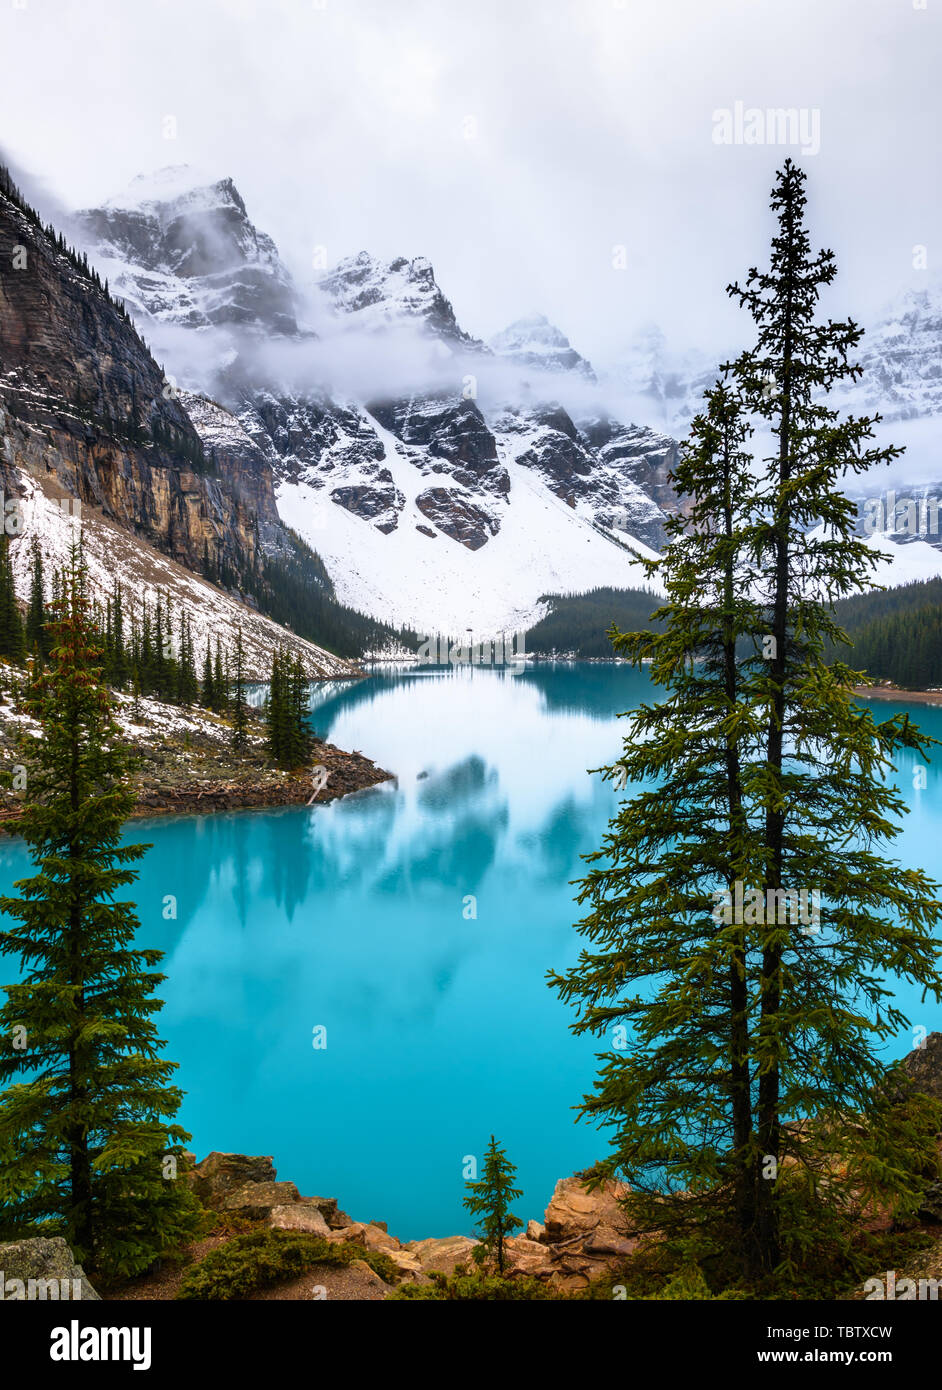 The famous moraine lake at a cloudy day in the Banff national park Stock Photo